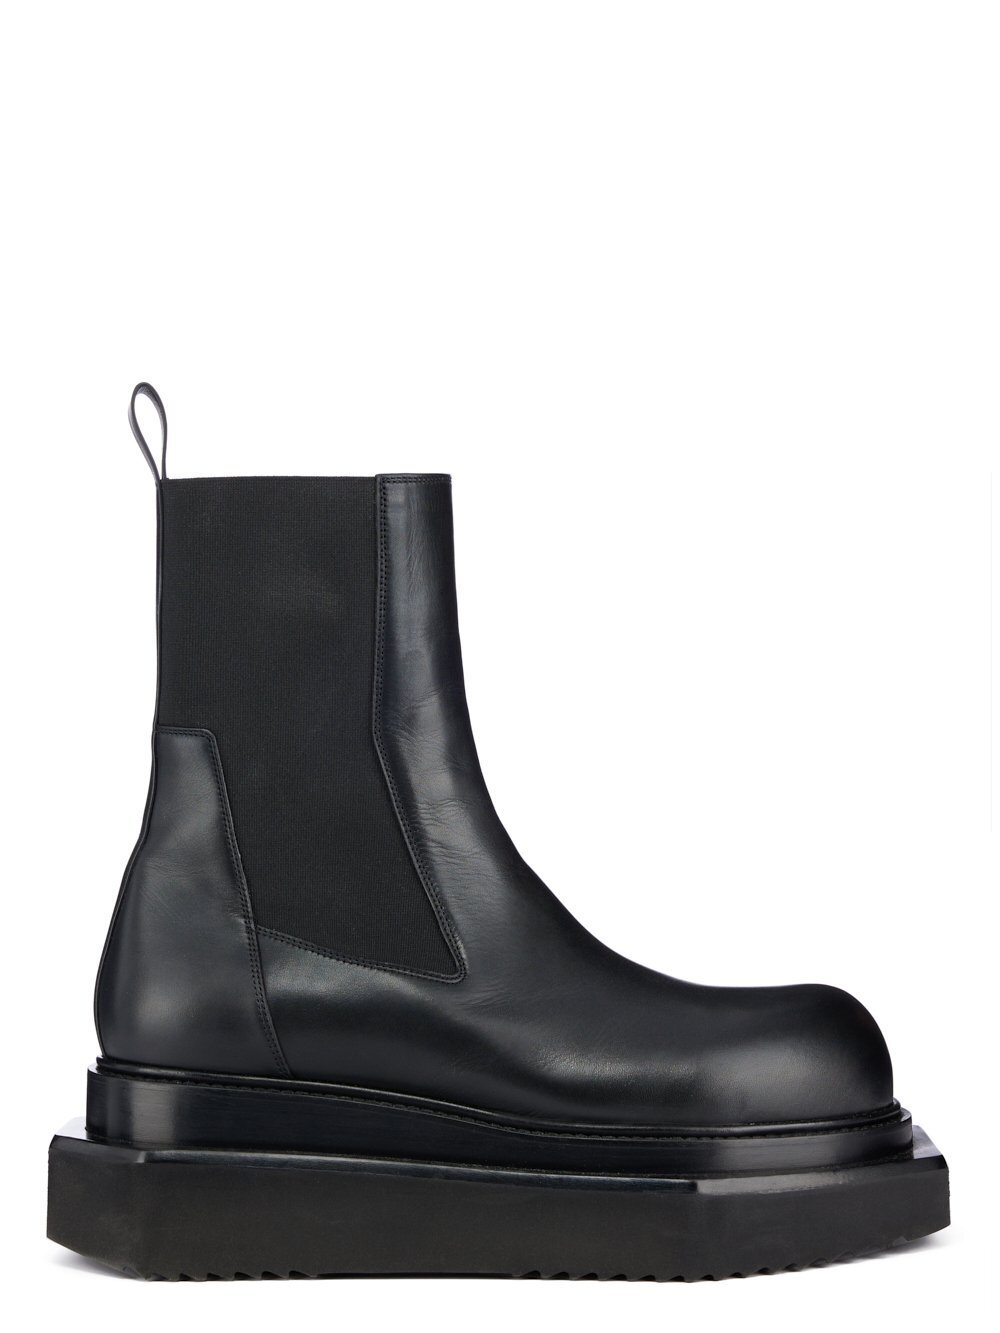 RICK OWENS FW23 LUXOR BEATLE TURBO CYCLOPS IN BLACK CORTINA GREASE CALF LEATHER